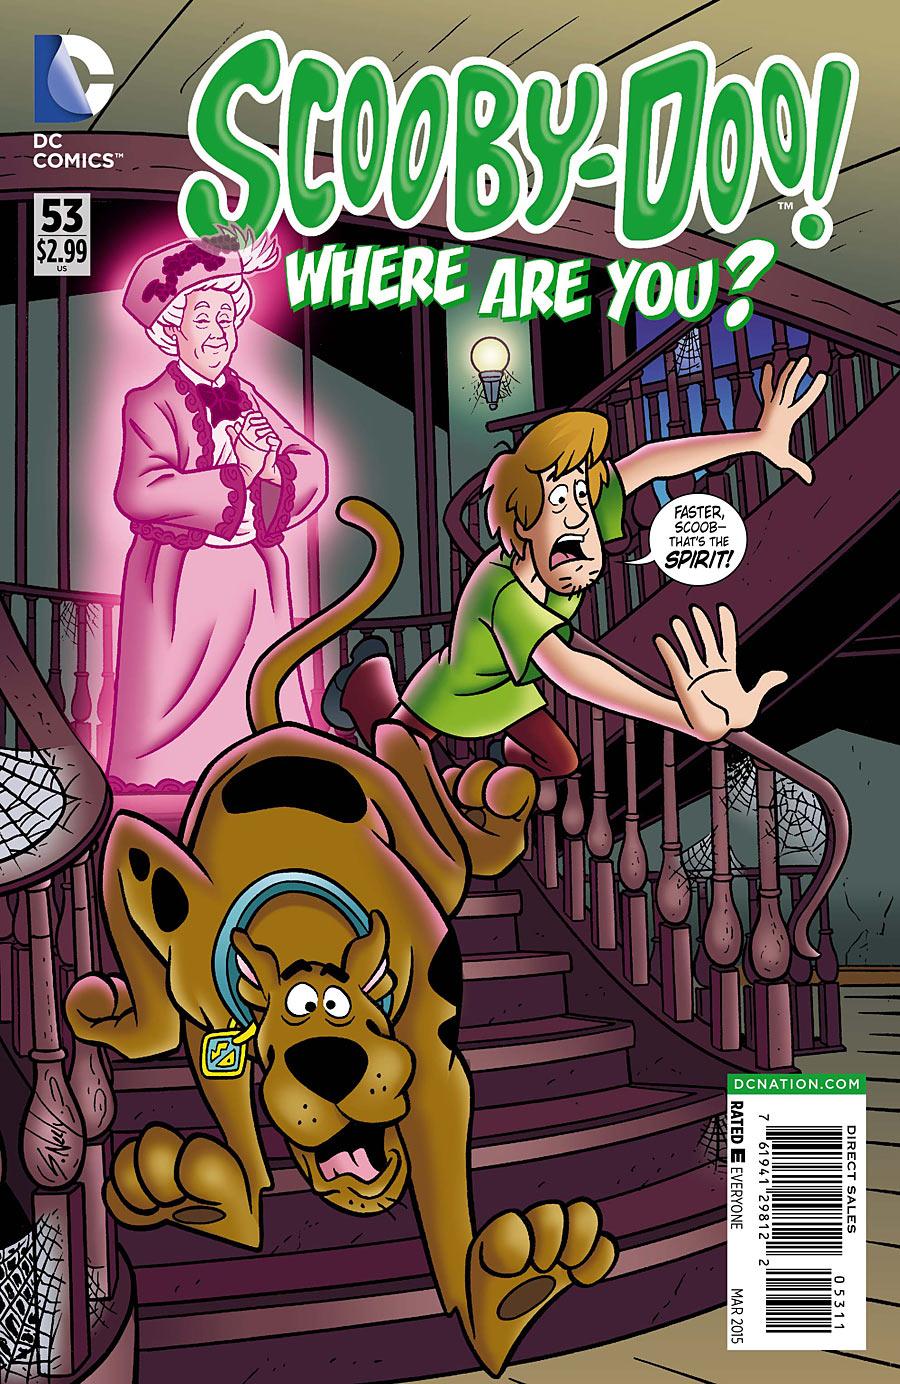 Scooby-Doo: Where Are You? Vol. 1 #53